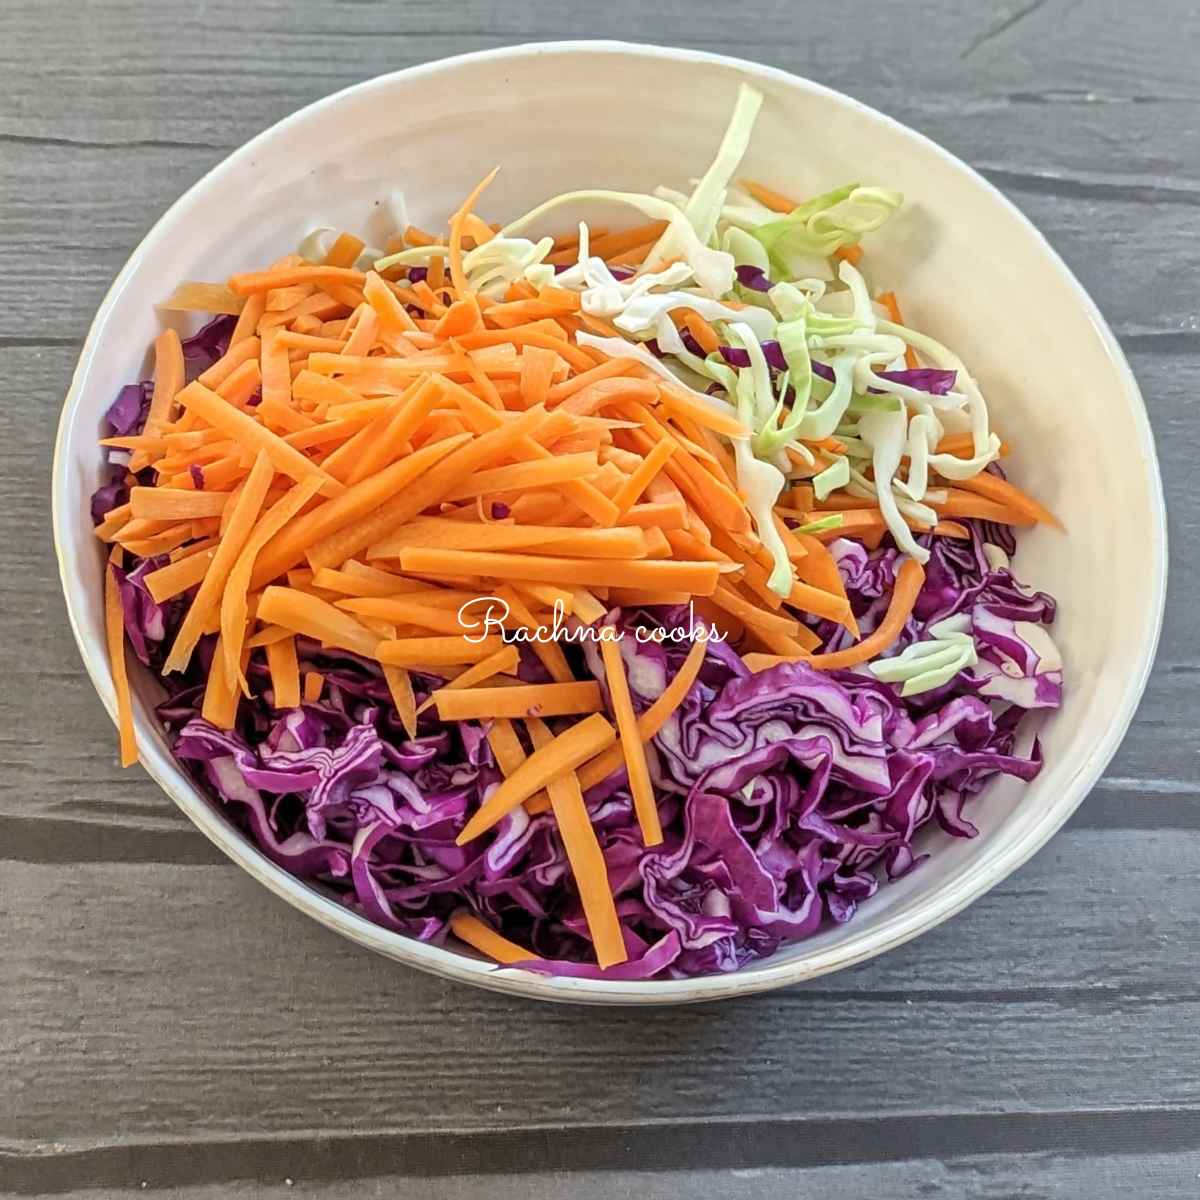 Shredded green cabbage, purple cabbage and carrot and in a bowl